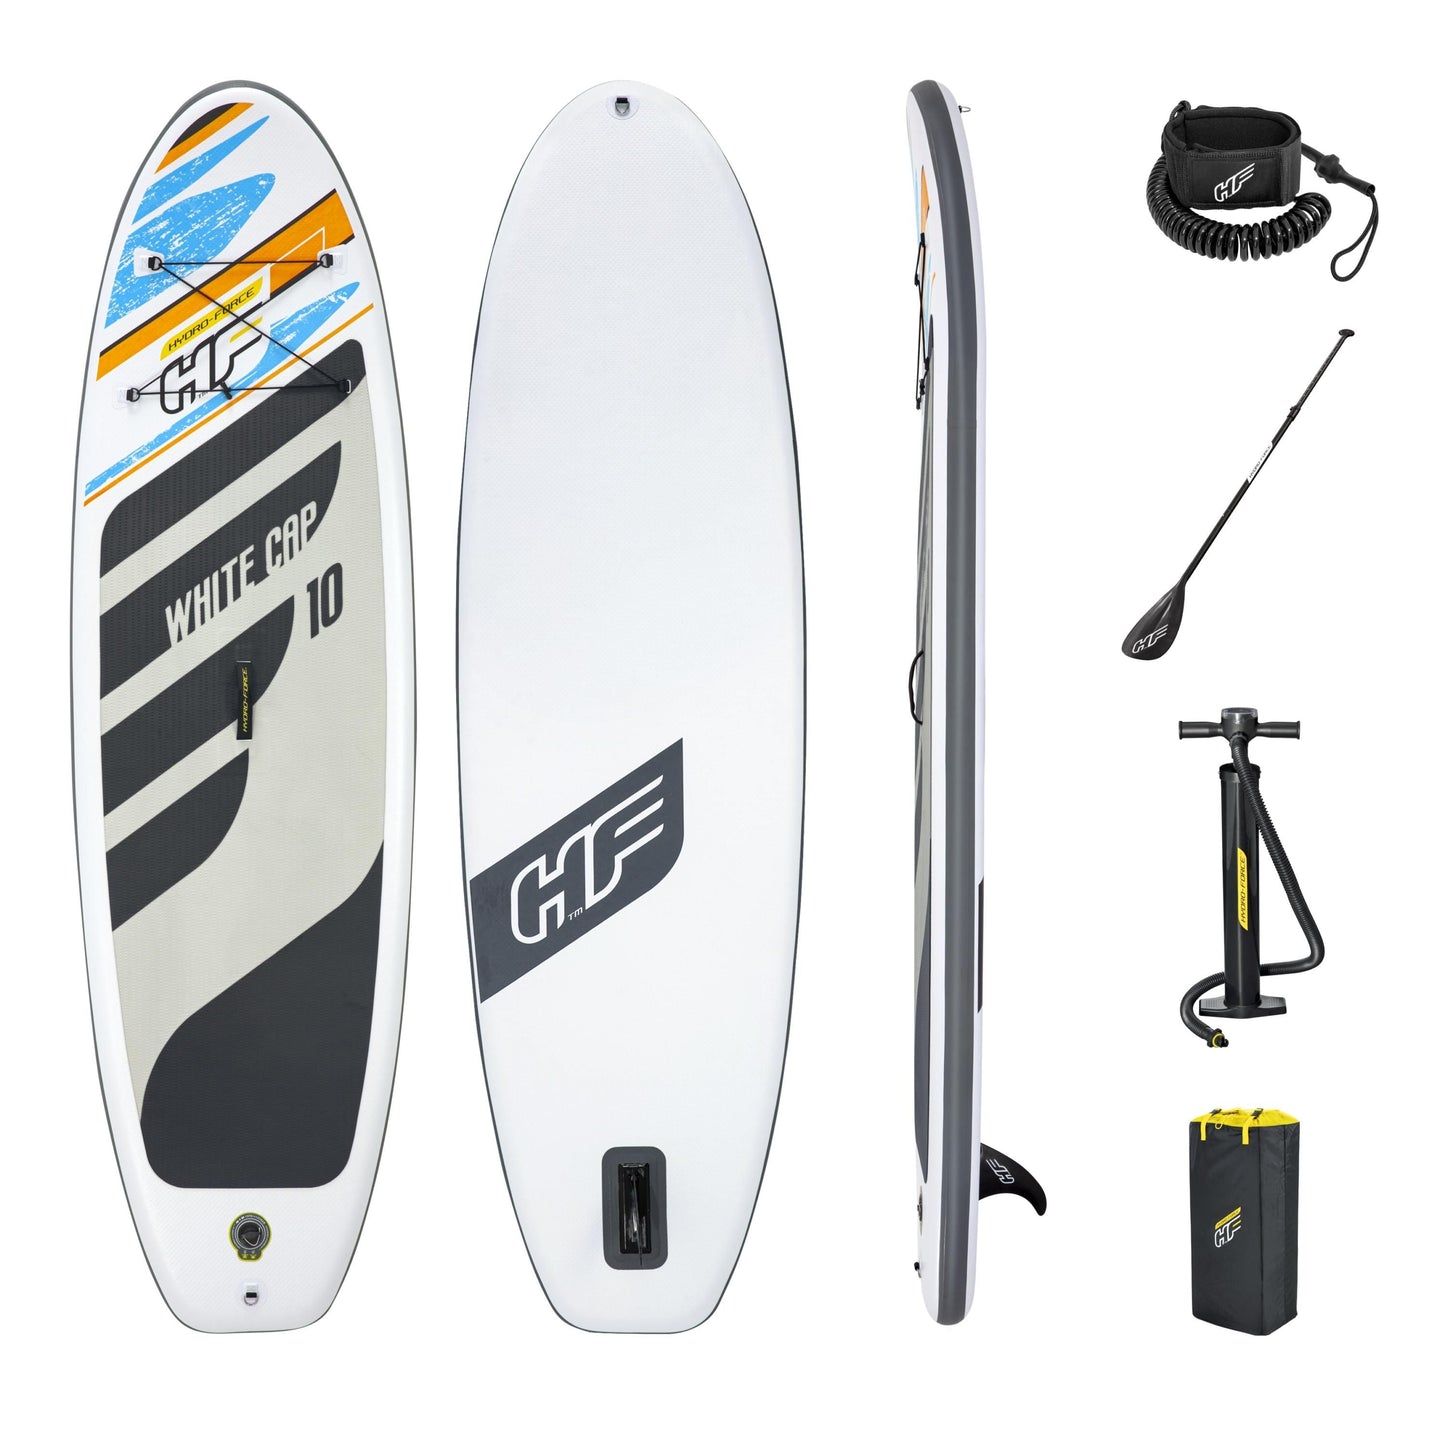 Bestway Hydro-Force White Cap 10ft Inflatable SUP Stand Up Paddle Board review